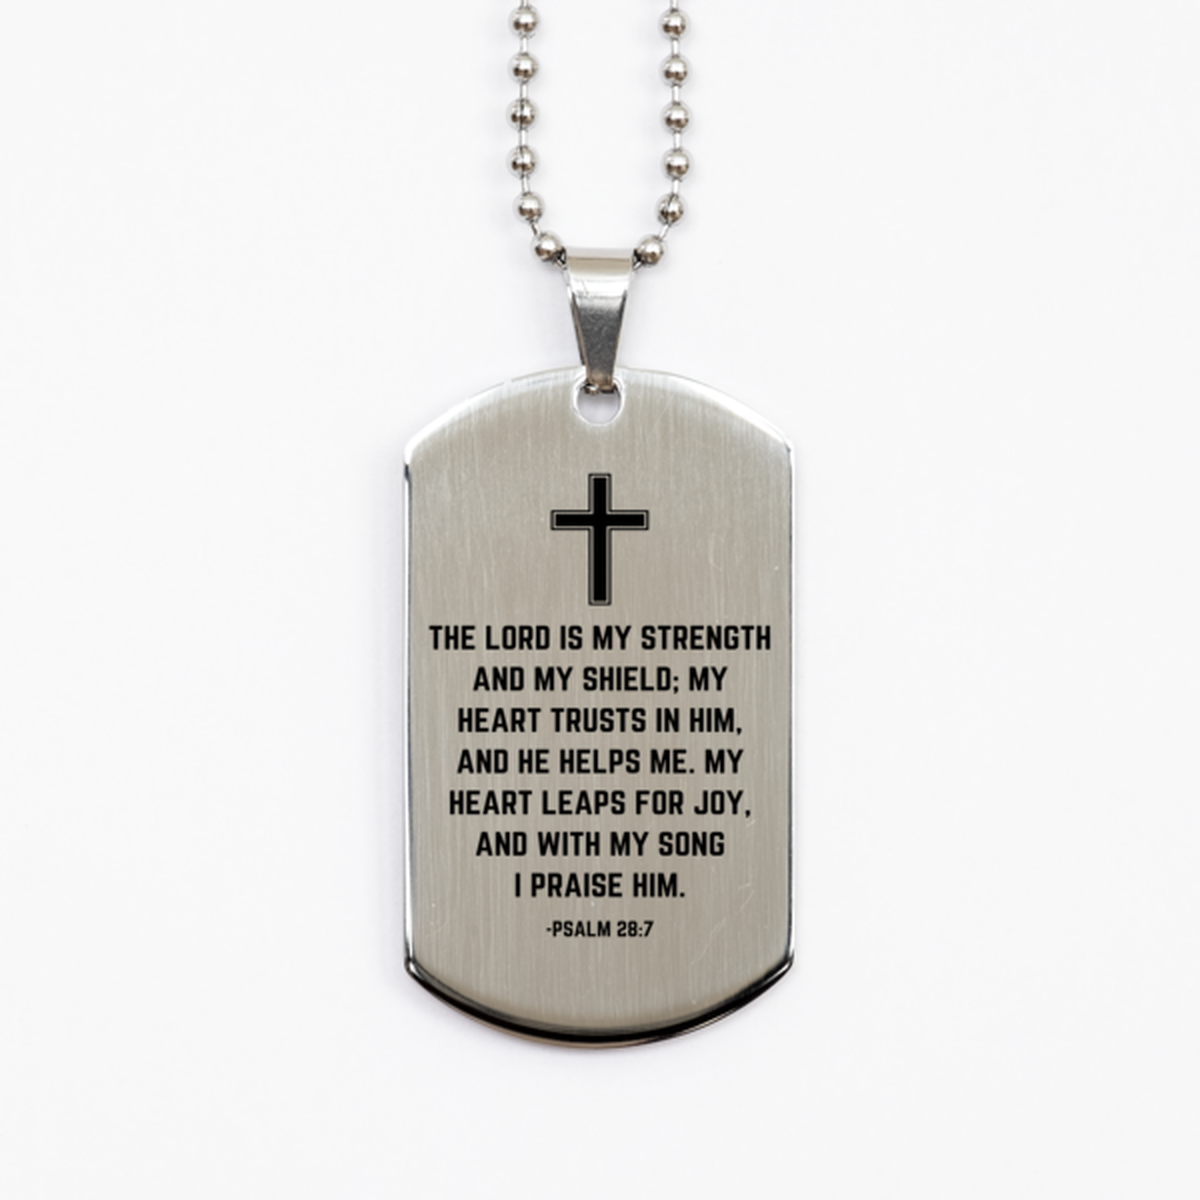 Baptism Gifts For Teenage Boys Girls, Christian Bible Verse Silver Dog Tag, The Lord is my strength and my shield, Confirmation Gifts, Bible Verse Necklace for Son, Godson, Grandson, Nephew